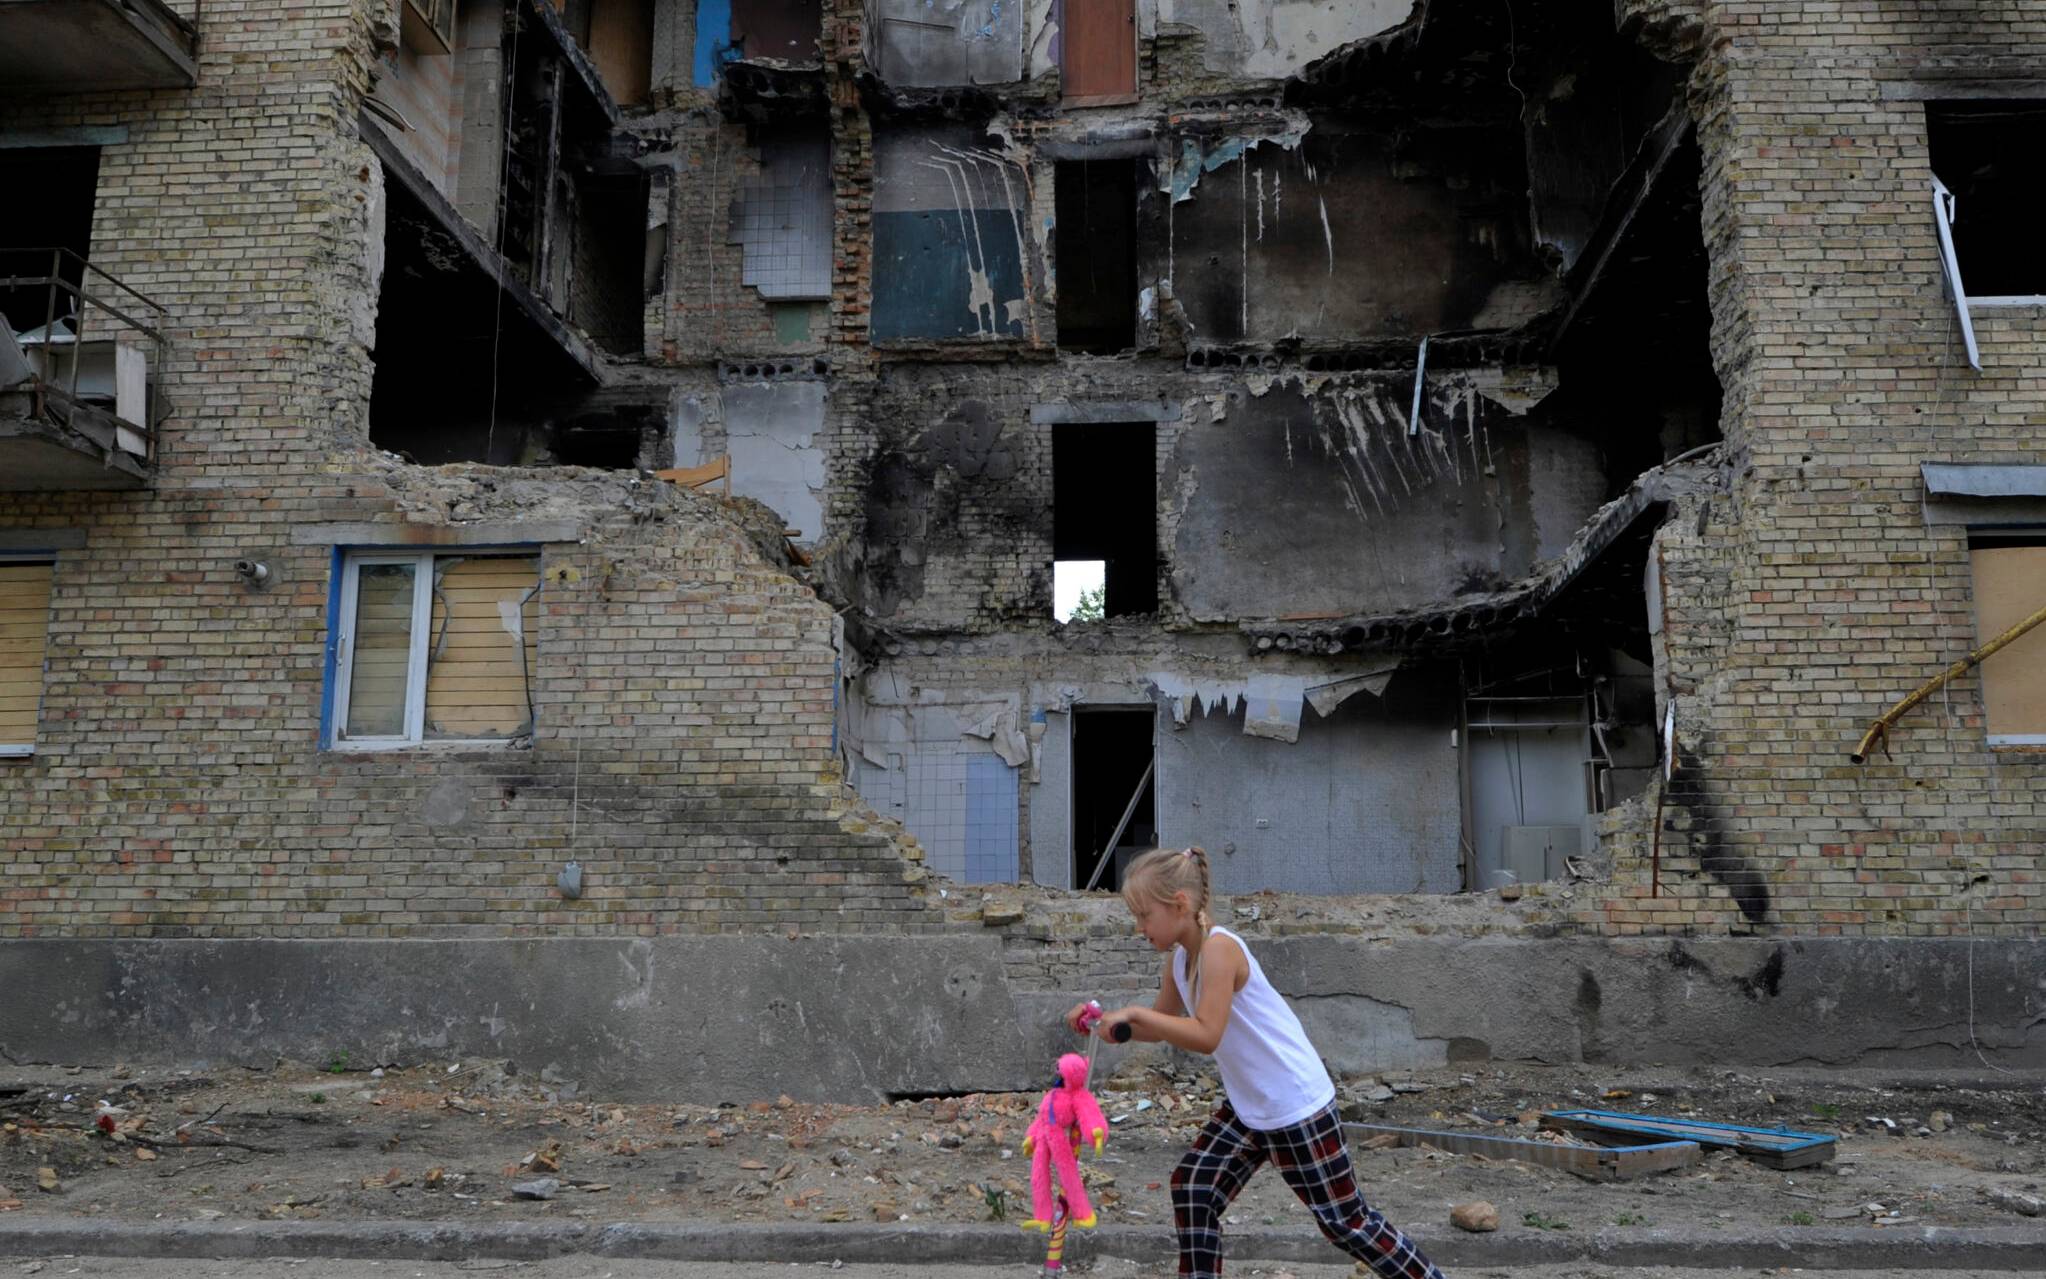 A girl rides a kick scooter past a destroyed residential building in the village of Horenka, Kyiv region, on June 4, 2022 amid the Russian invasion of Ukraine. (Photo by Sergei CHUZAVKOV / AFP)